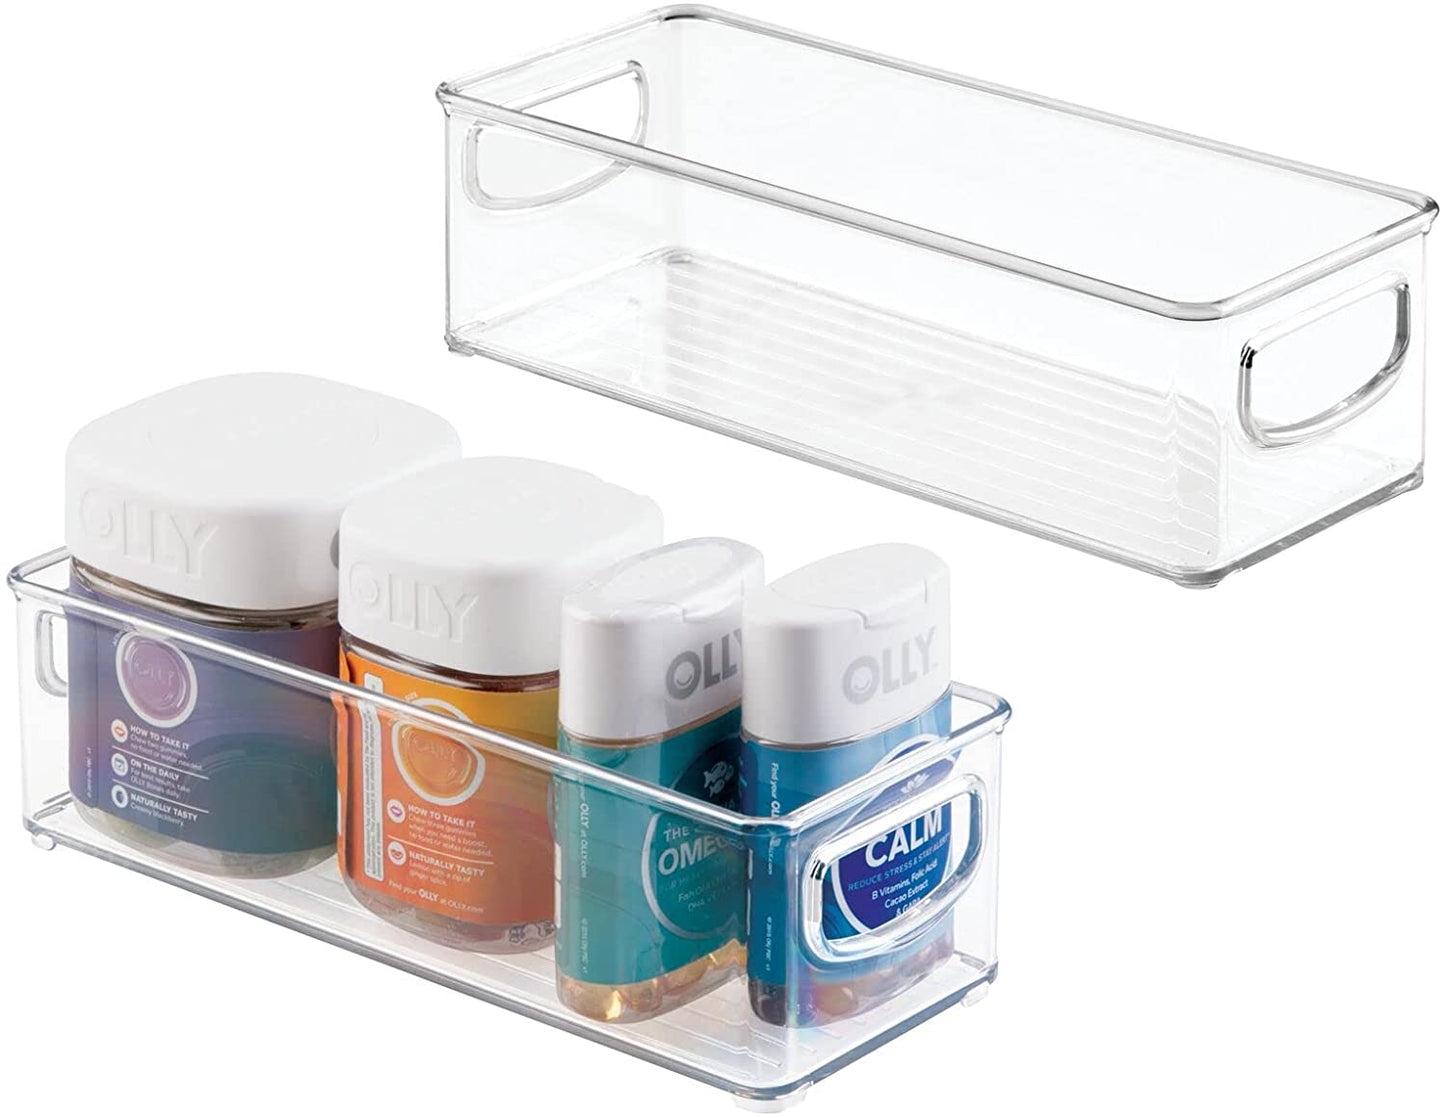 mDesign Plastic Bathroom Organizer - Storage Holder Bin with Handles for Vanity, Cupboard, Cabinet Shelf, Linen or Hallway Closets, Holds Styling Tools, Beauty Products, or Toiletries - 2 Pack - Clear